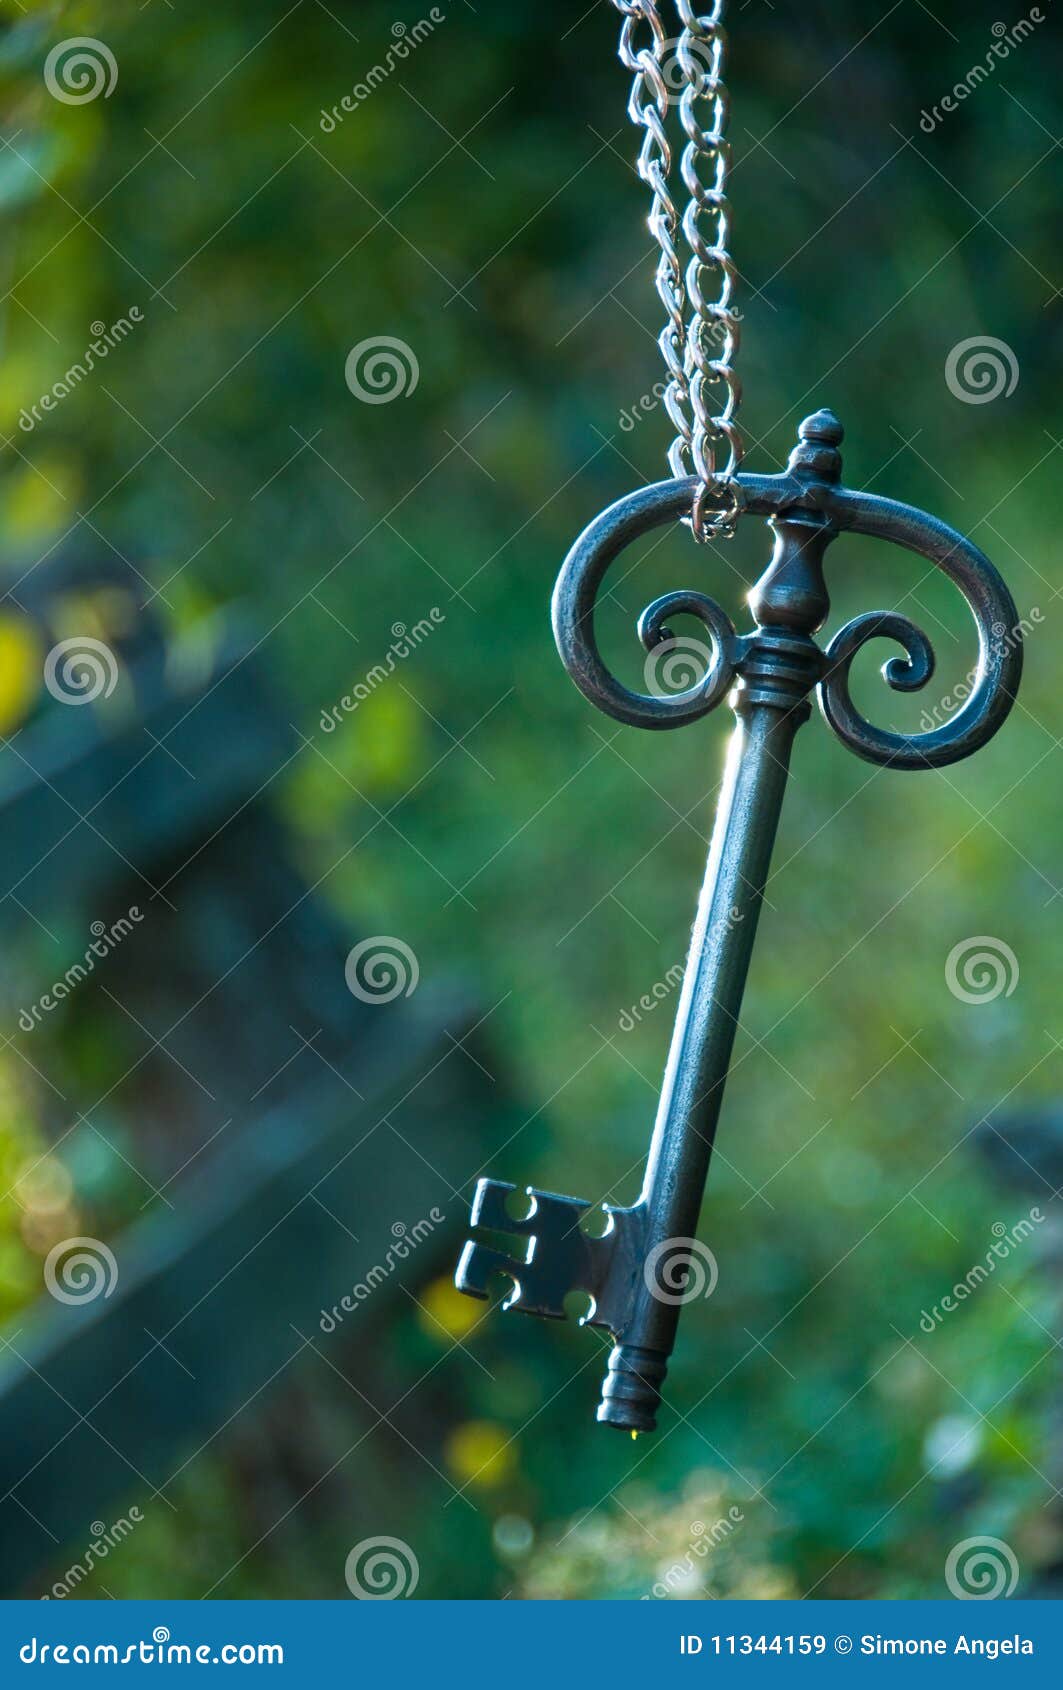 old big sunlit key with chain